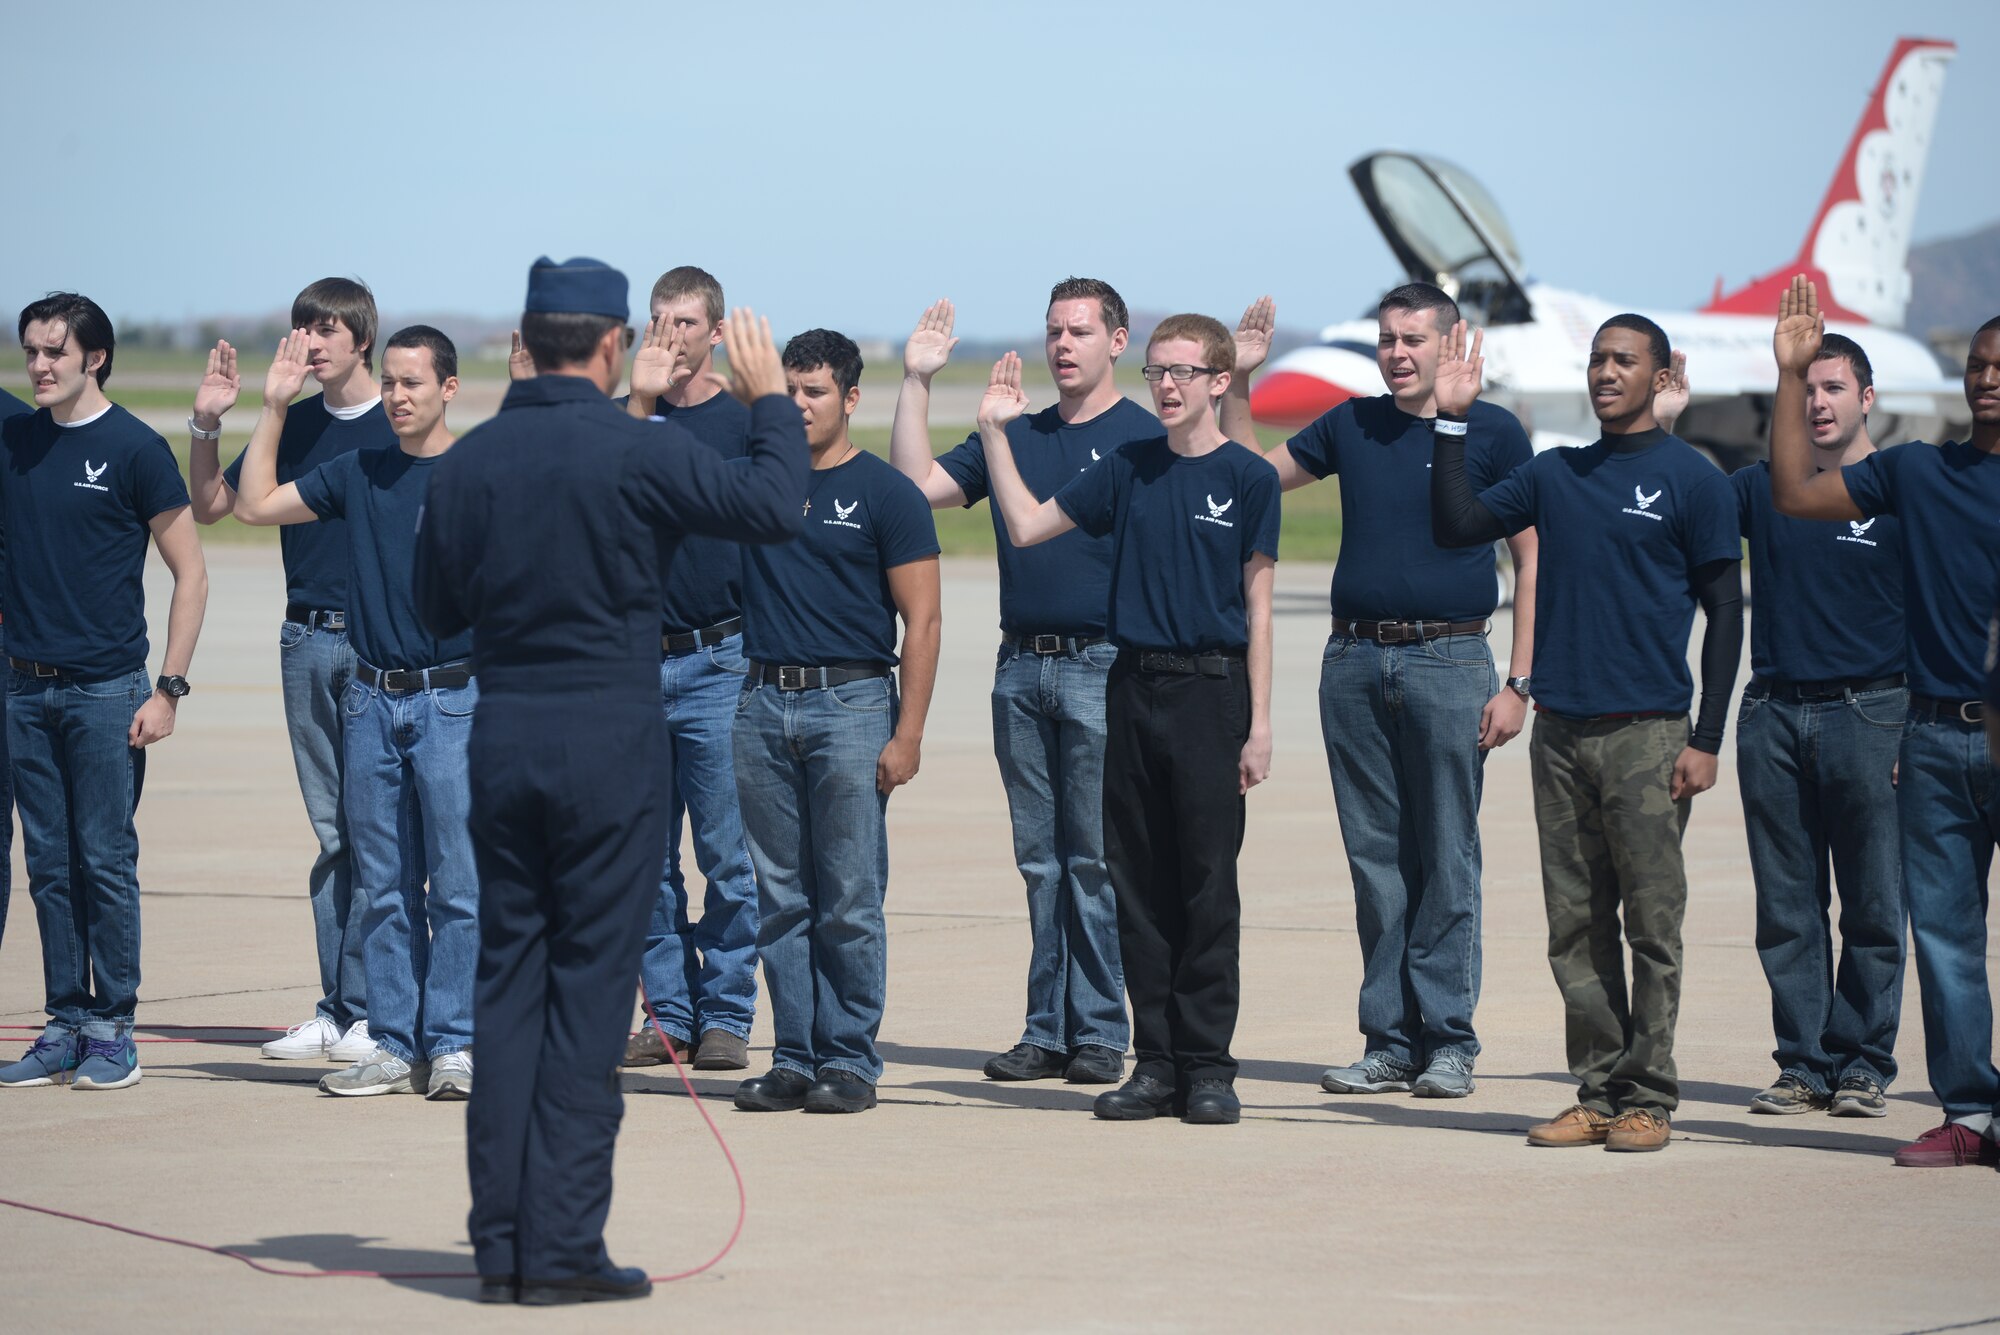 ALTUS AIR FORCE BASE, Okla. – Thomas Farley repeats the Oath of Enlistment during the 2014 Wings of Freedom Open House, Sept. 13, 2014. Thomas and more than 20 other high school graduates began their career in the Air Force by being sworn in by the U.S. Air Force Thunderbirds. (U.S. Air Force photo by Senior Airman Levin Boland/Released)